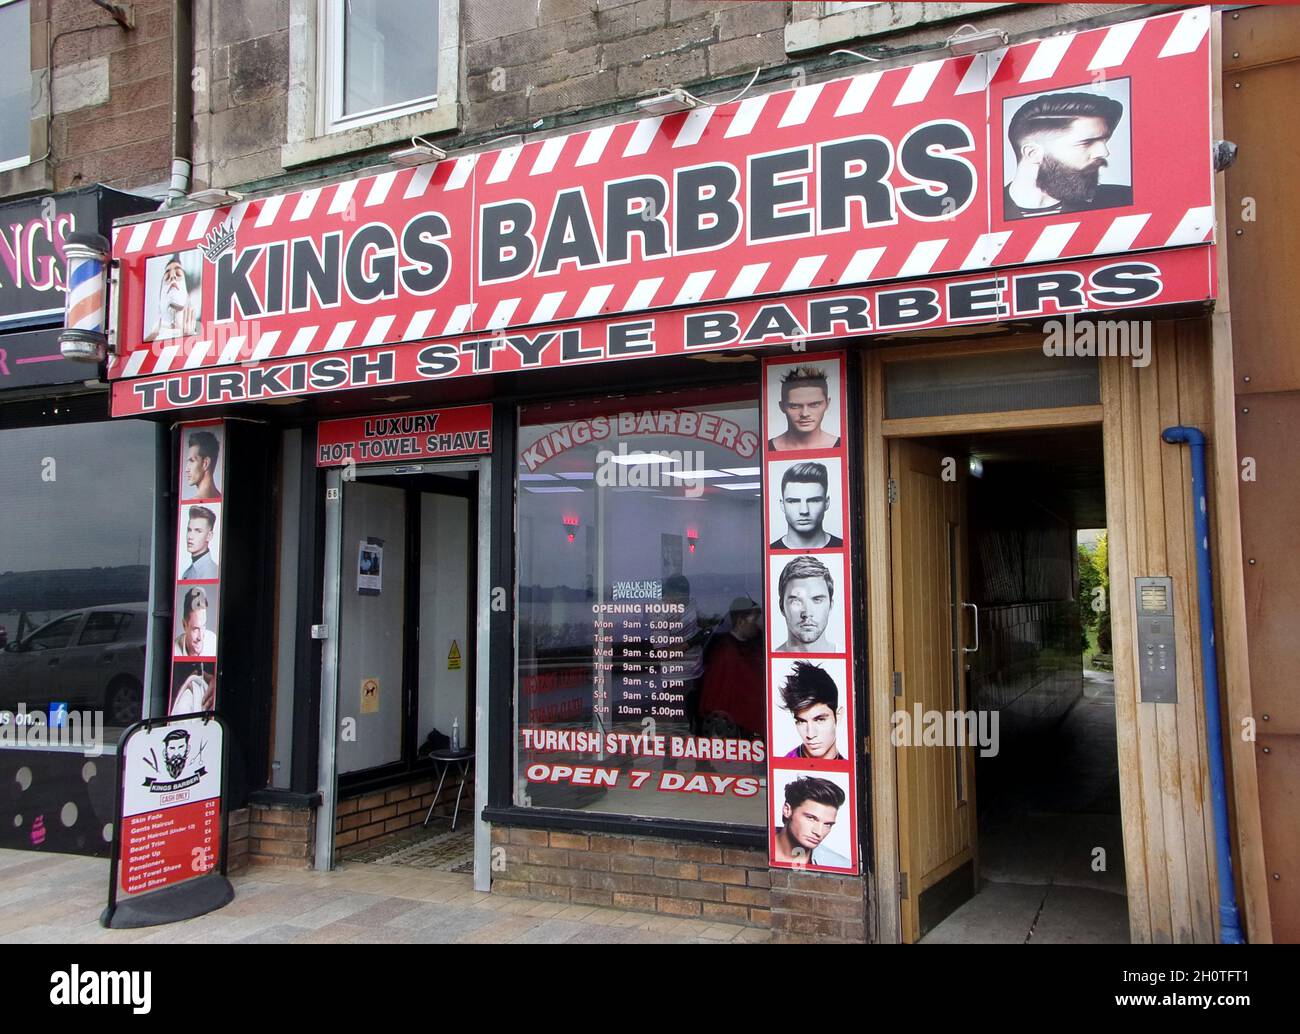 A very striking barber shop front in Helensburgh just outside Glasgow. You can't miss Kings Barbers shop and is the place to go for a shave or a haircut. ©Alan Wylie/ALAMY Stock Photo